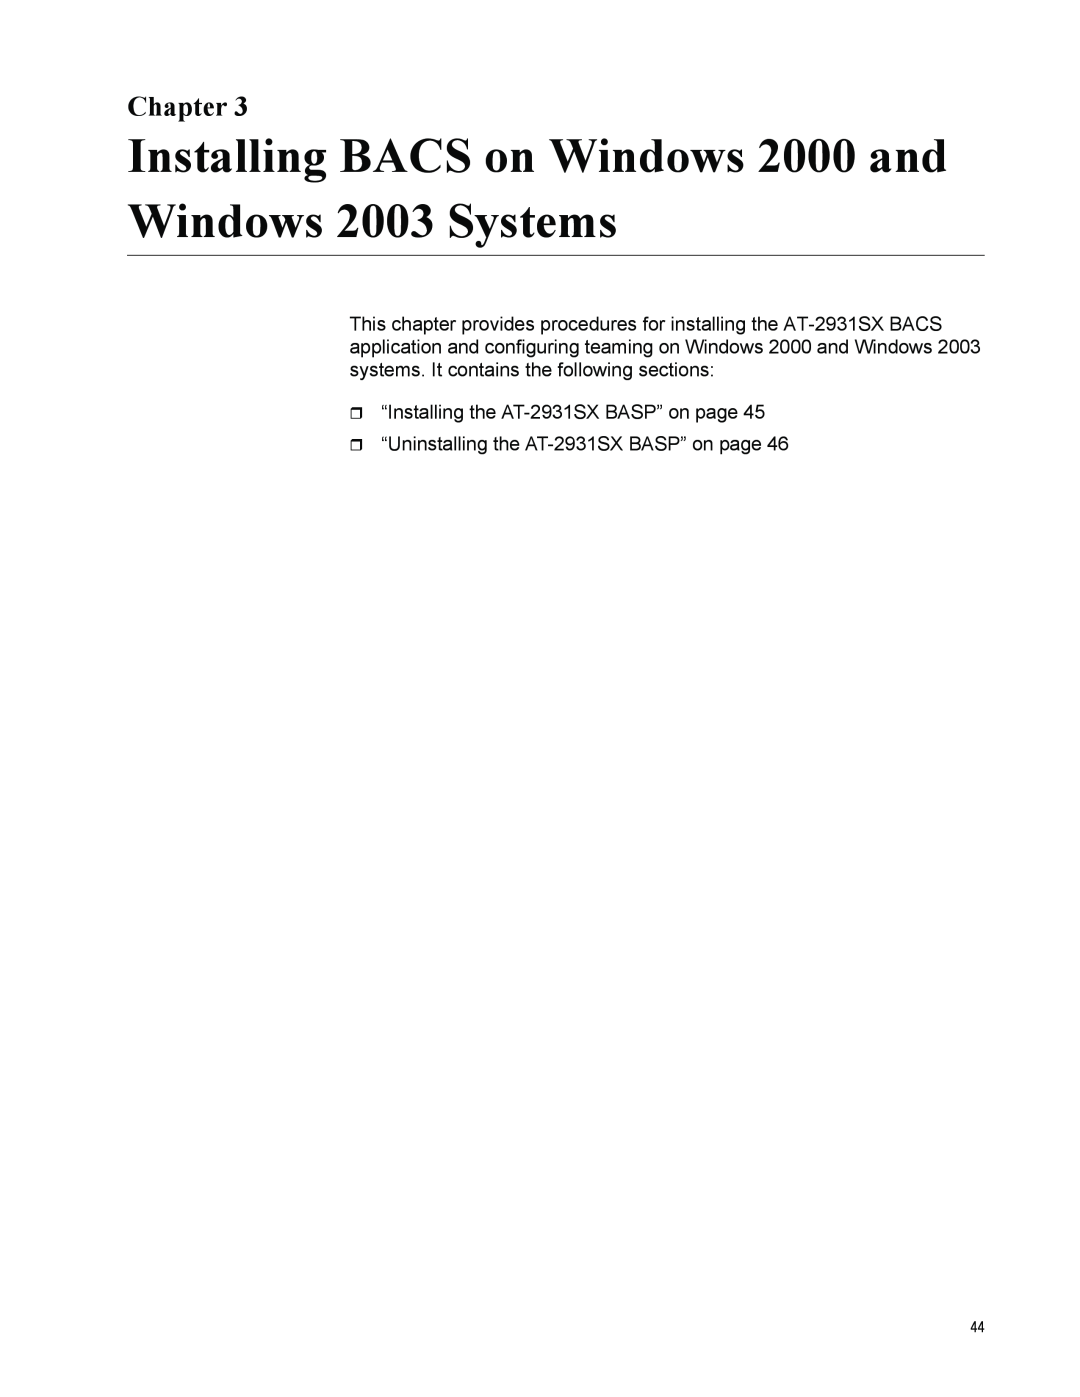 Allied Telesis AT-2931SX manual Installing BACS on Windows 2000 and Windows 2003 Systems, Chapter 